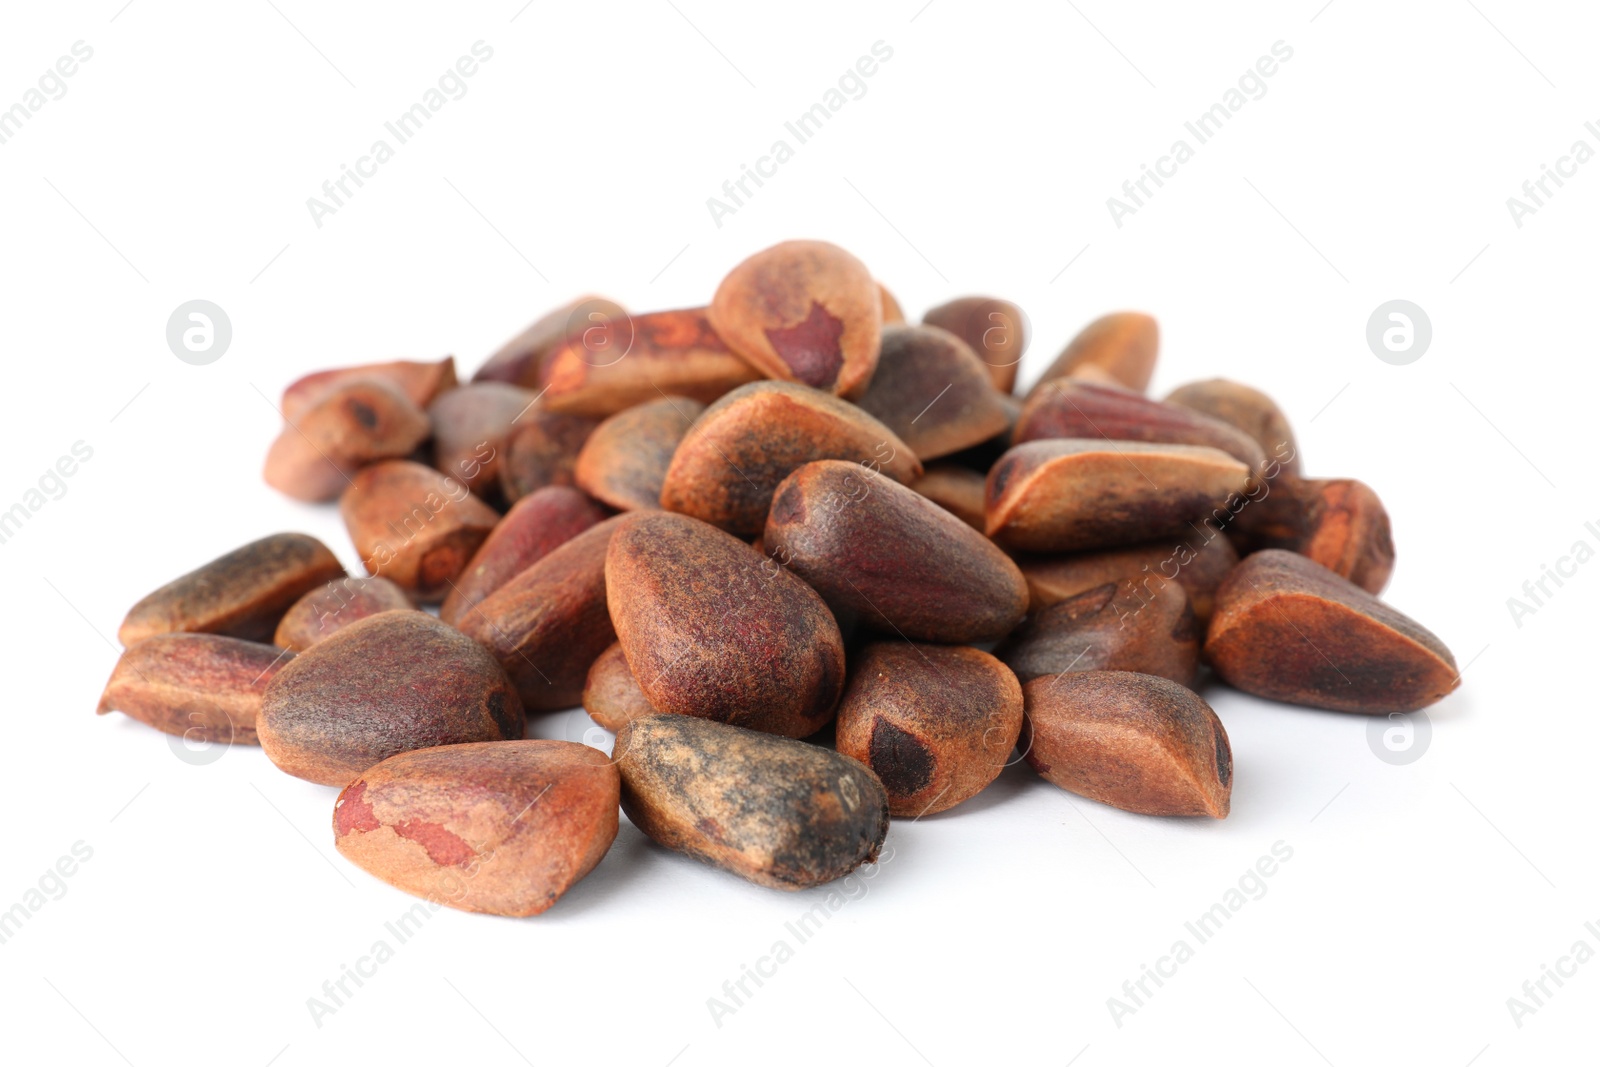 Photo of Heap of pine nuts on white background. Healthy snack